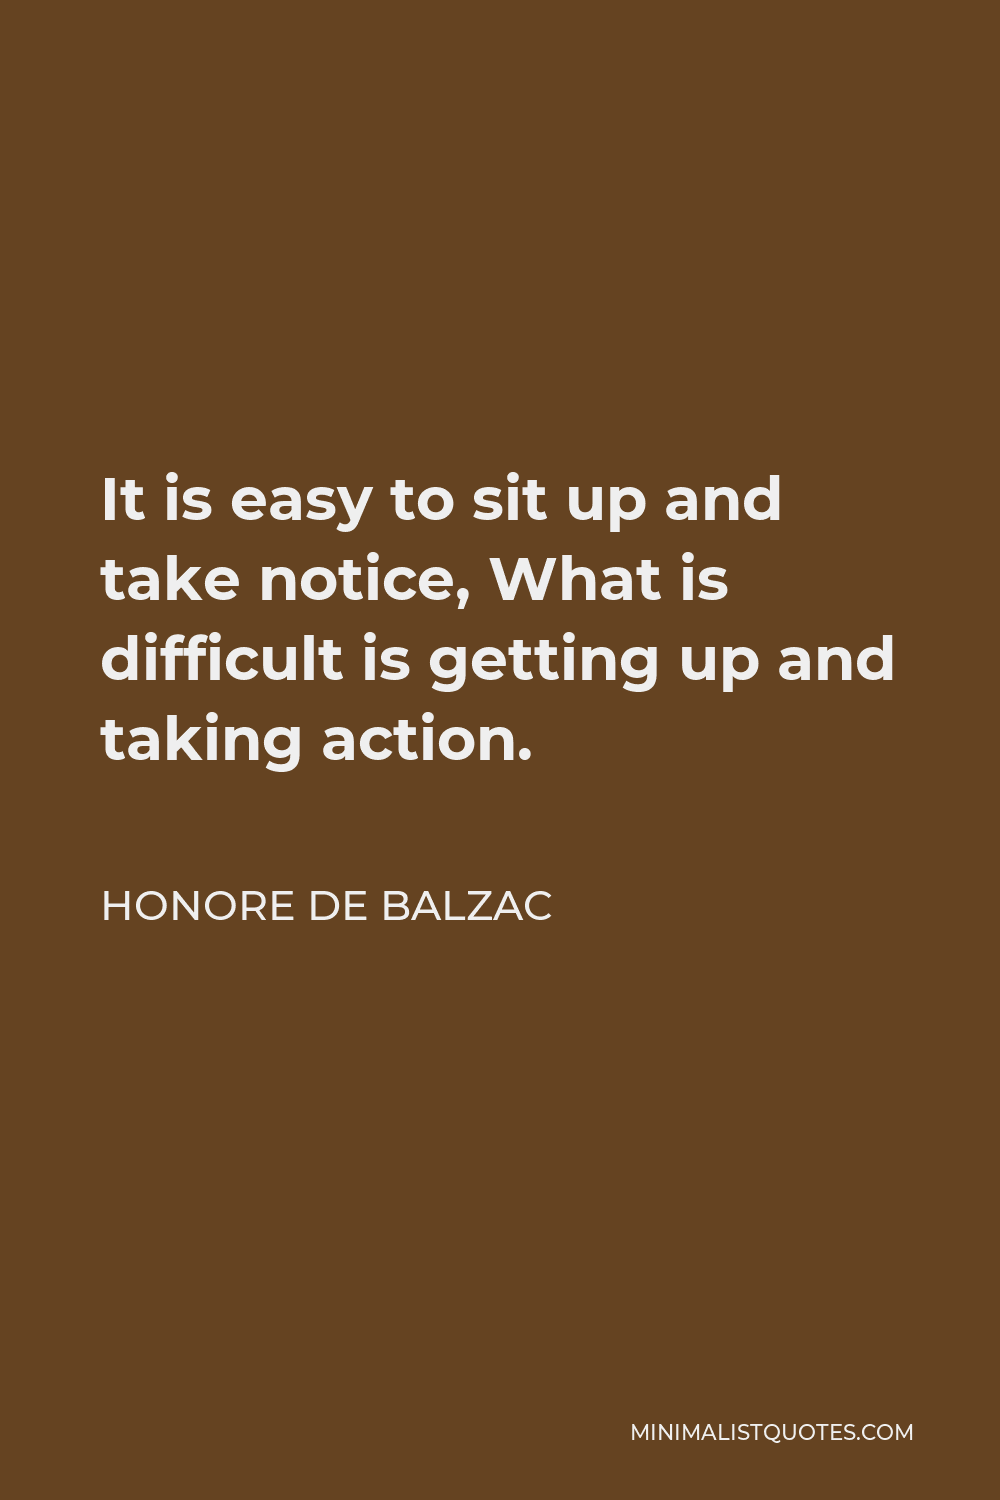 Honore de Balzac Quote - It is easy to sit up and take notice, What is difficult is getting up and taking action.